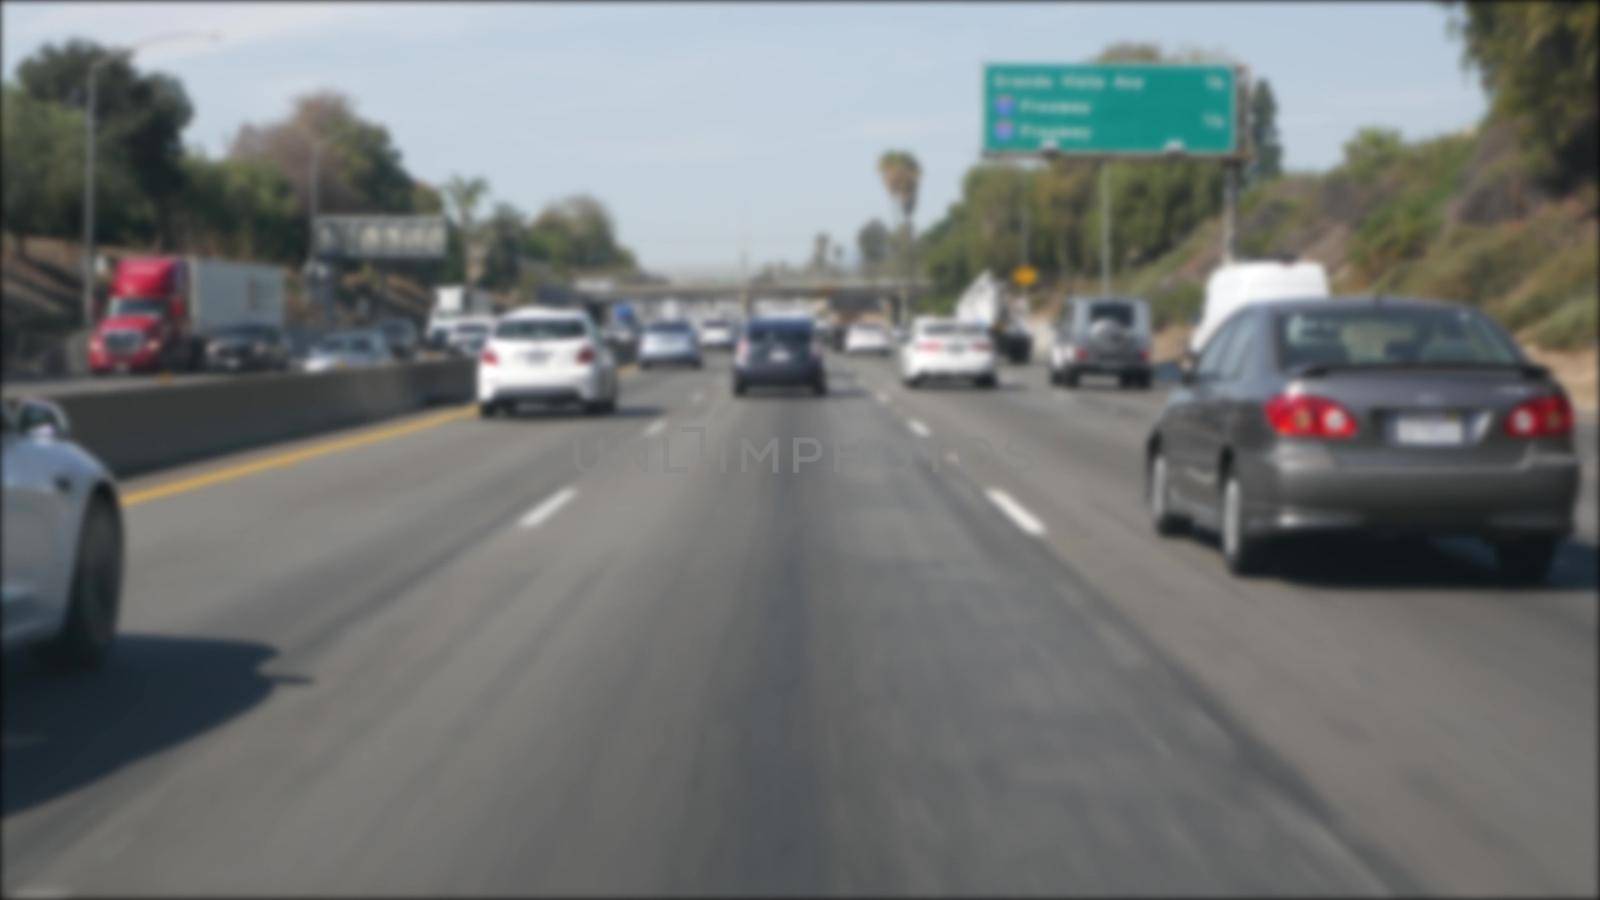 Driving on intercity freeway in Los Angeles, California USA. Defocused view from car thru glass windshield on busy interstate highway. Blurred suburb multiple lane driveway. Camera inside auto in LA.